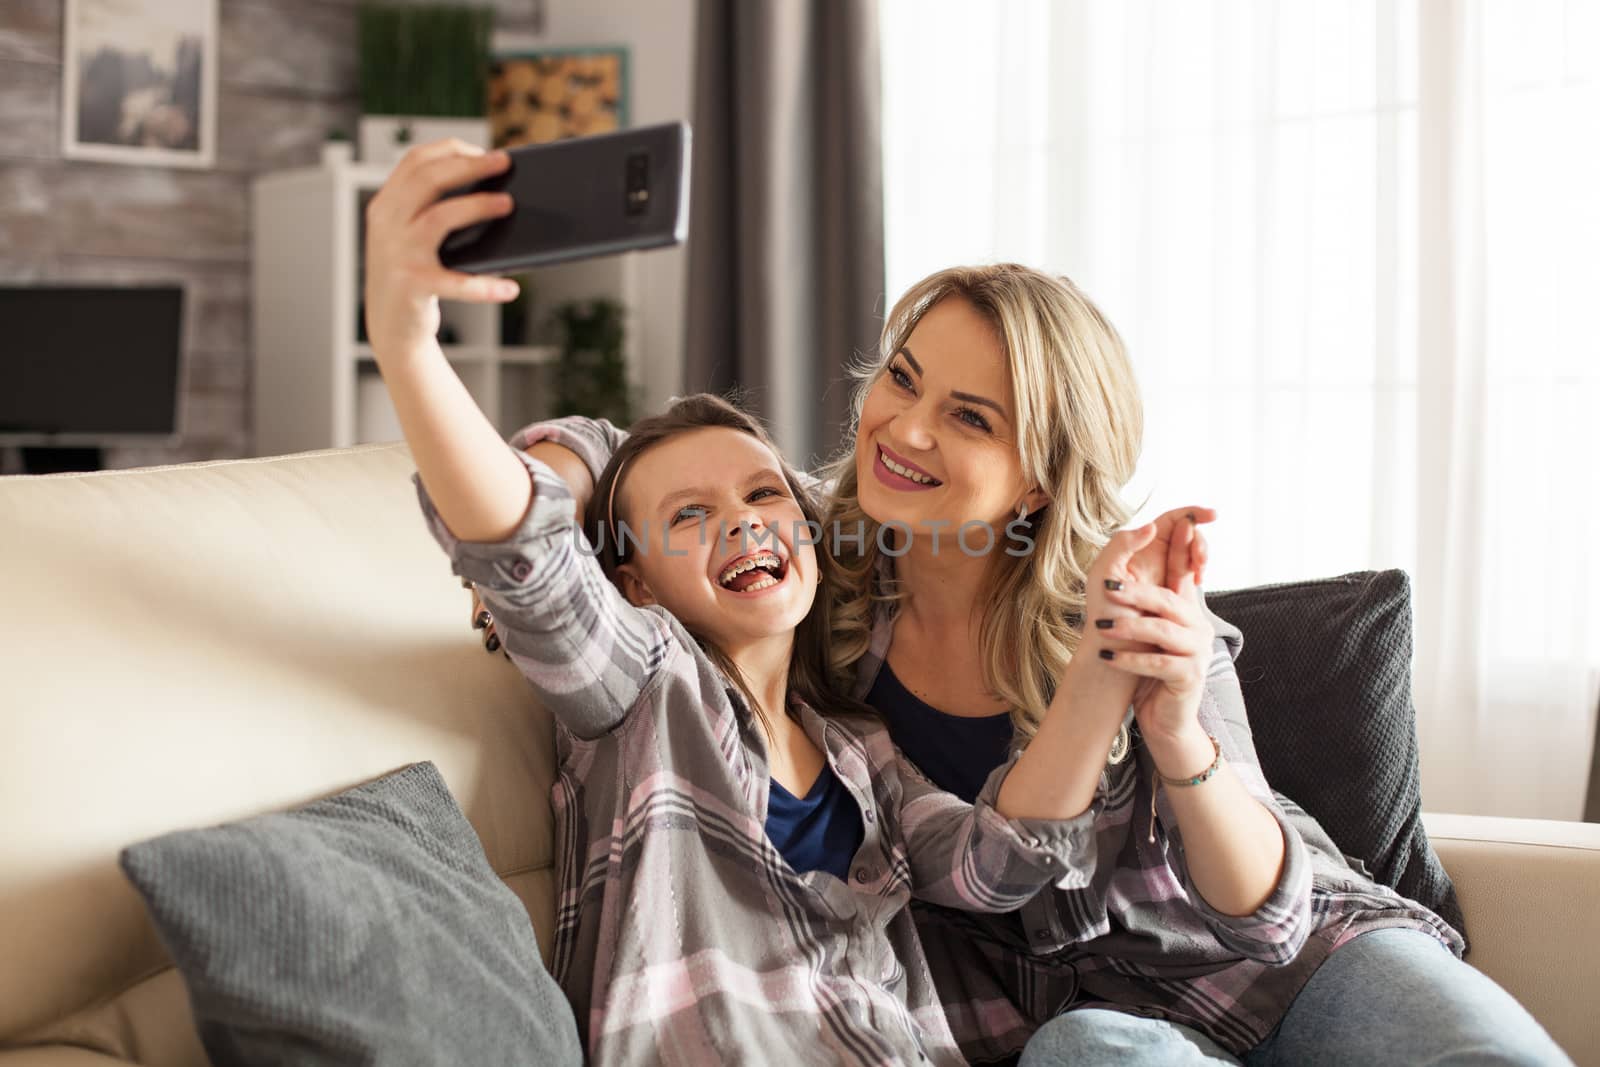 Mother and daughter laughing while taking a selfie on the couch in living room.